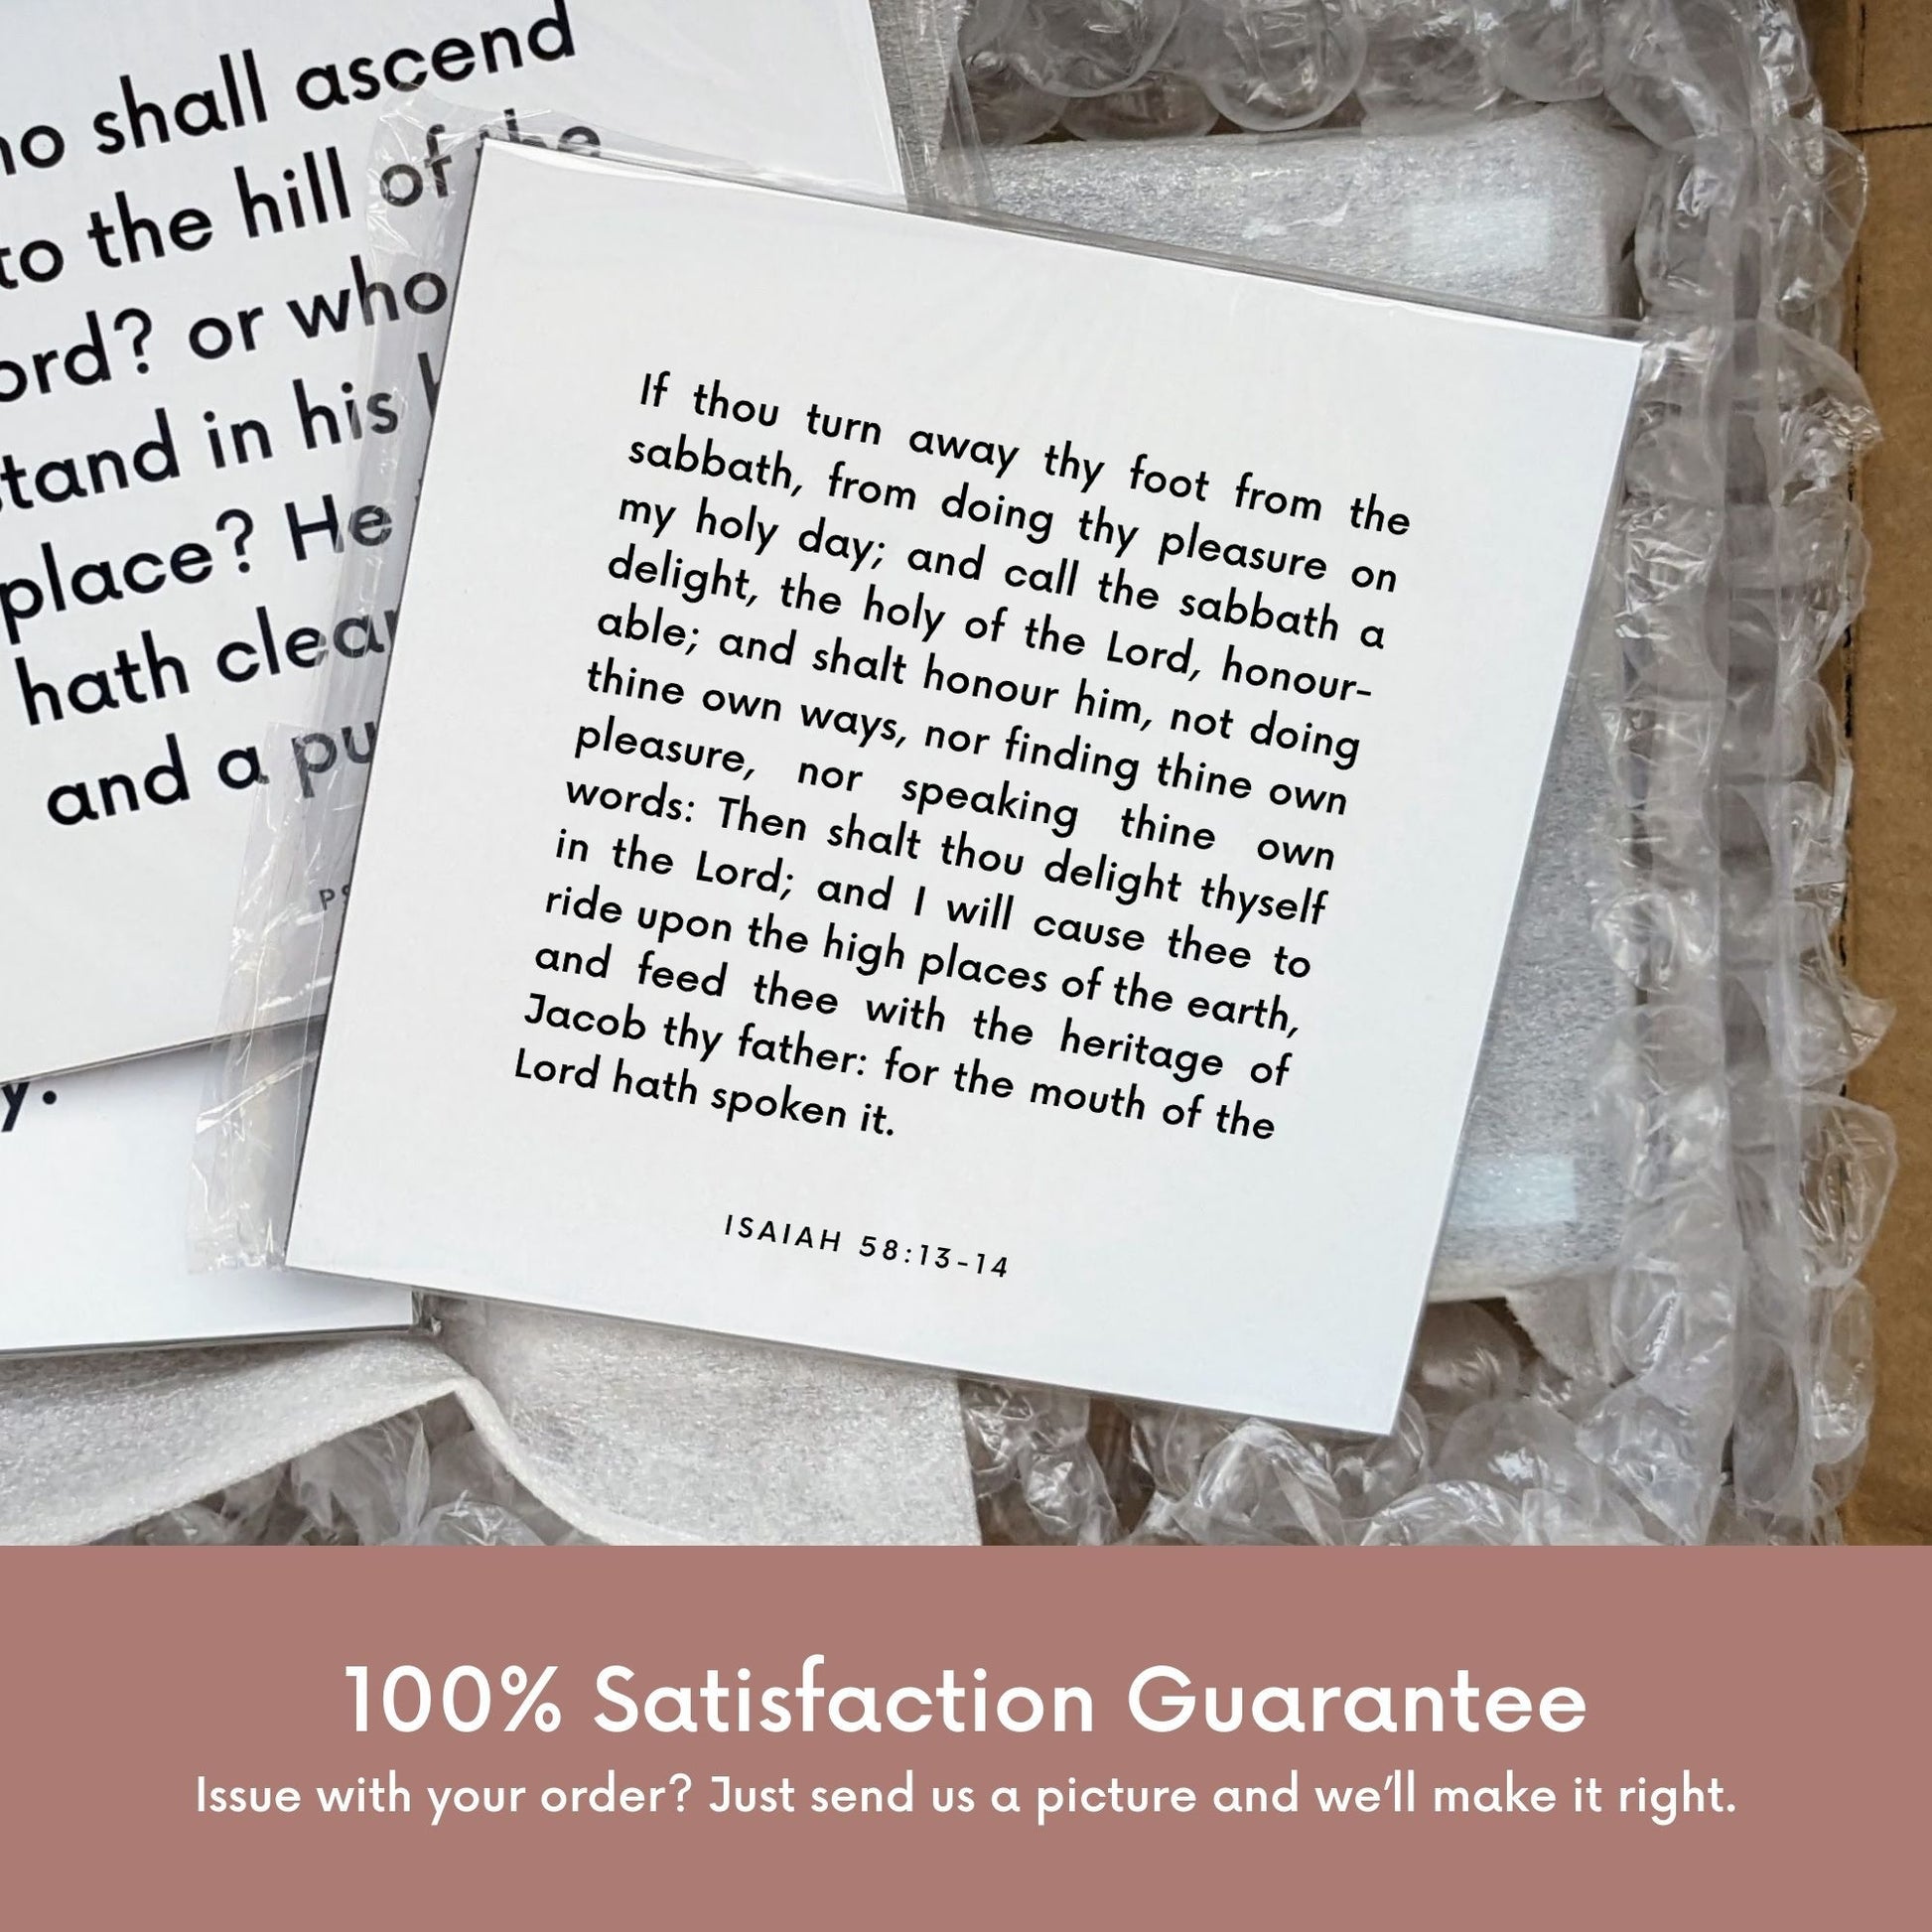 Shipping materials for scripture tile of Isaiah 58:13-14 - "Call the sabbath a delight"